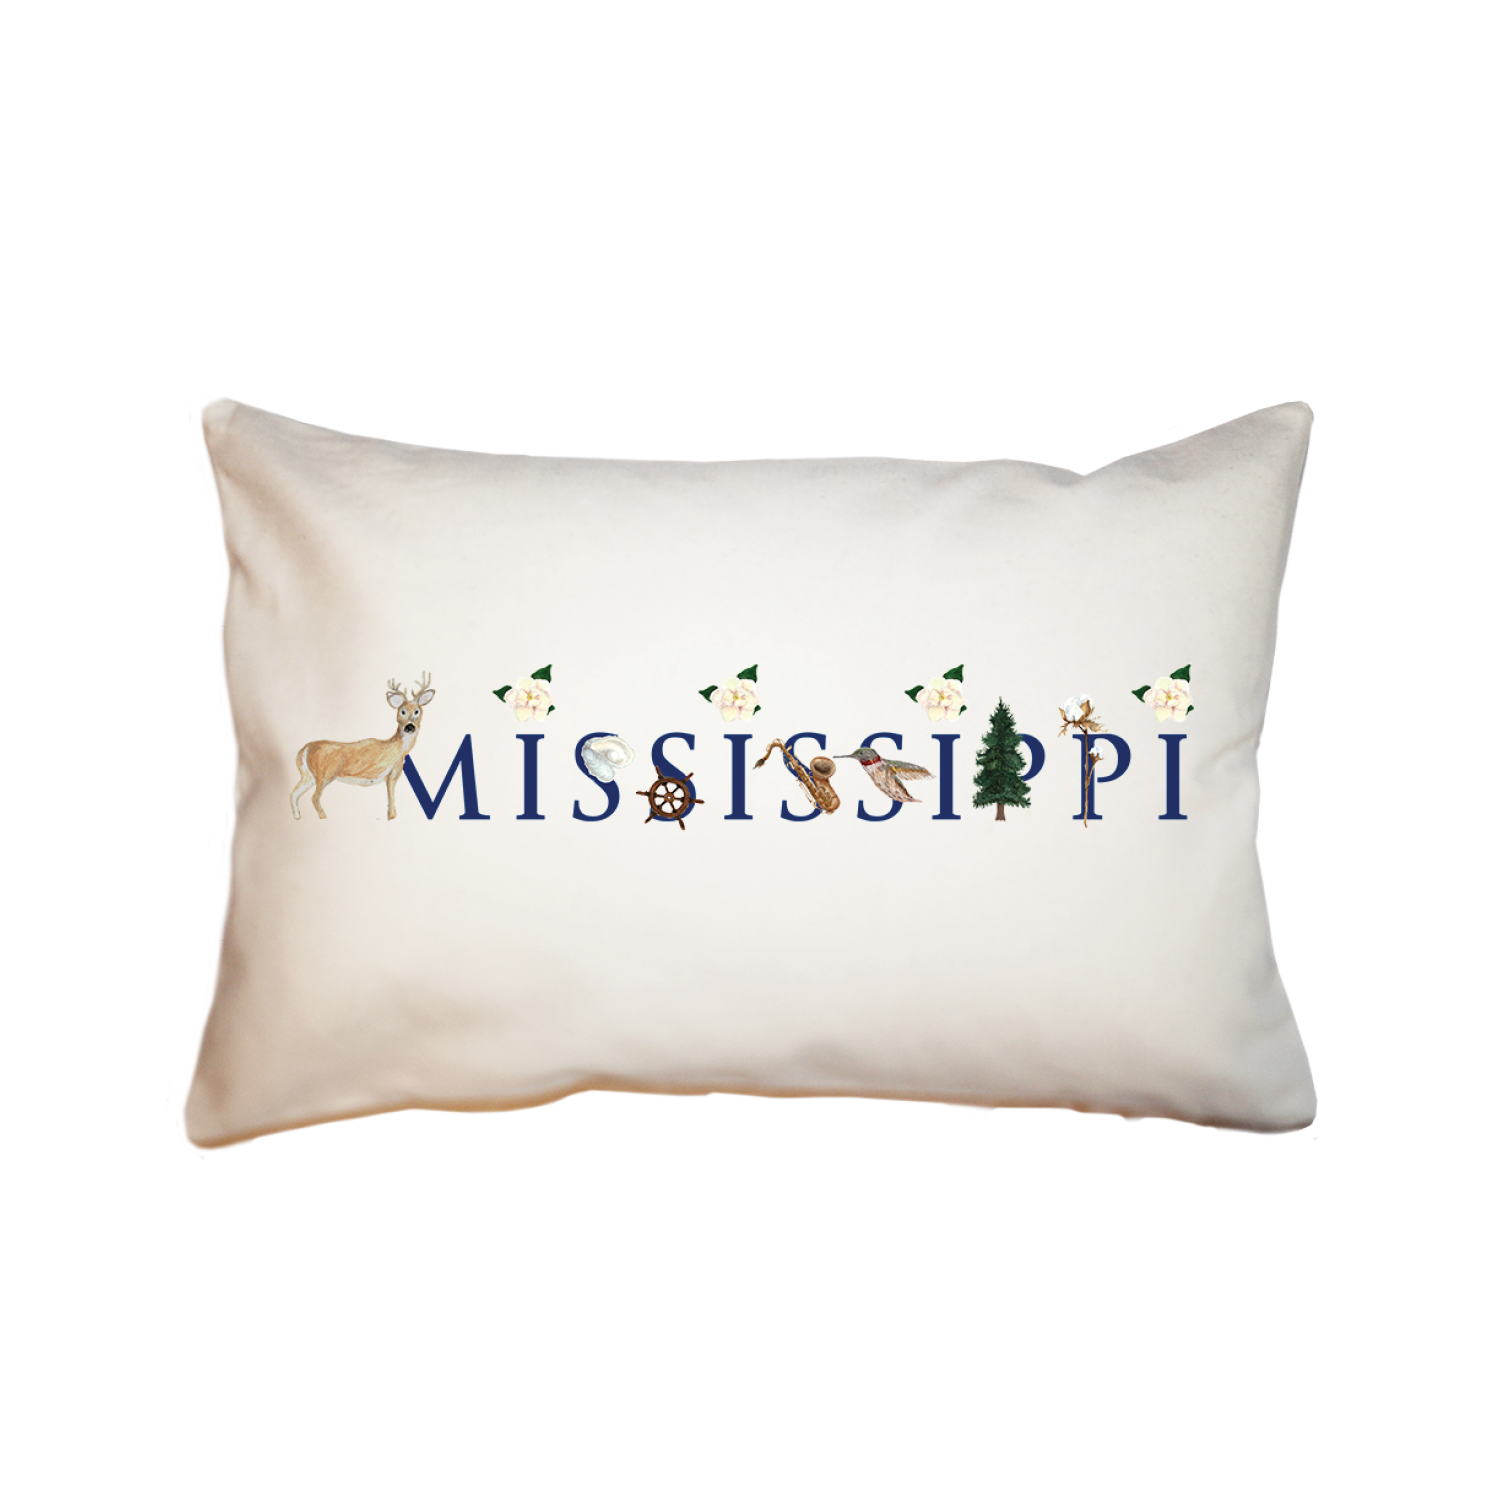 Mississippi large rectangle pillow